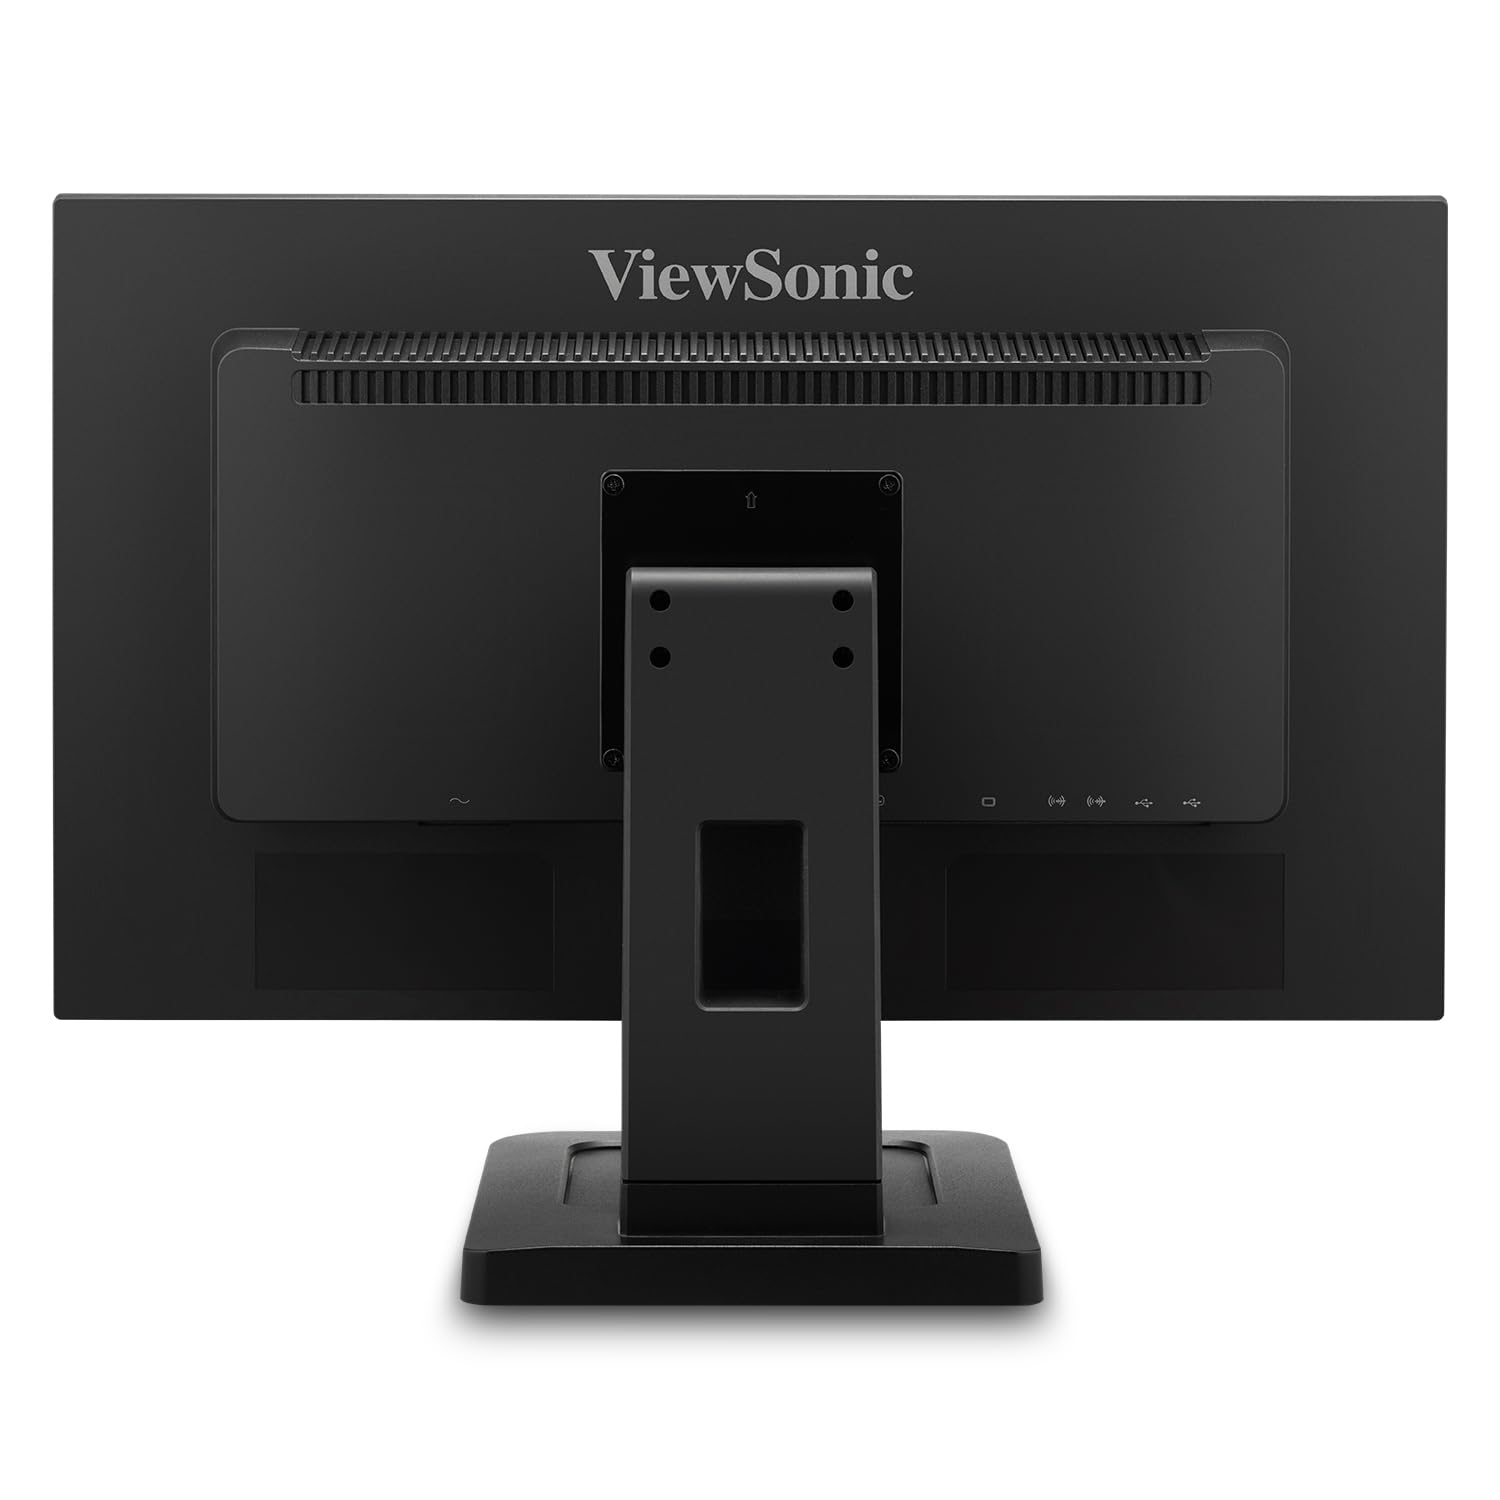 ViewSonic TD2211 22 Inch 1080p Single Point Resistive Touch Screen Monitor with VGA, HDMI, DVI, and USB Hub